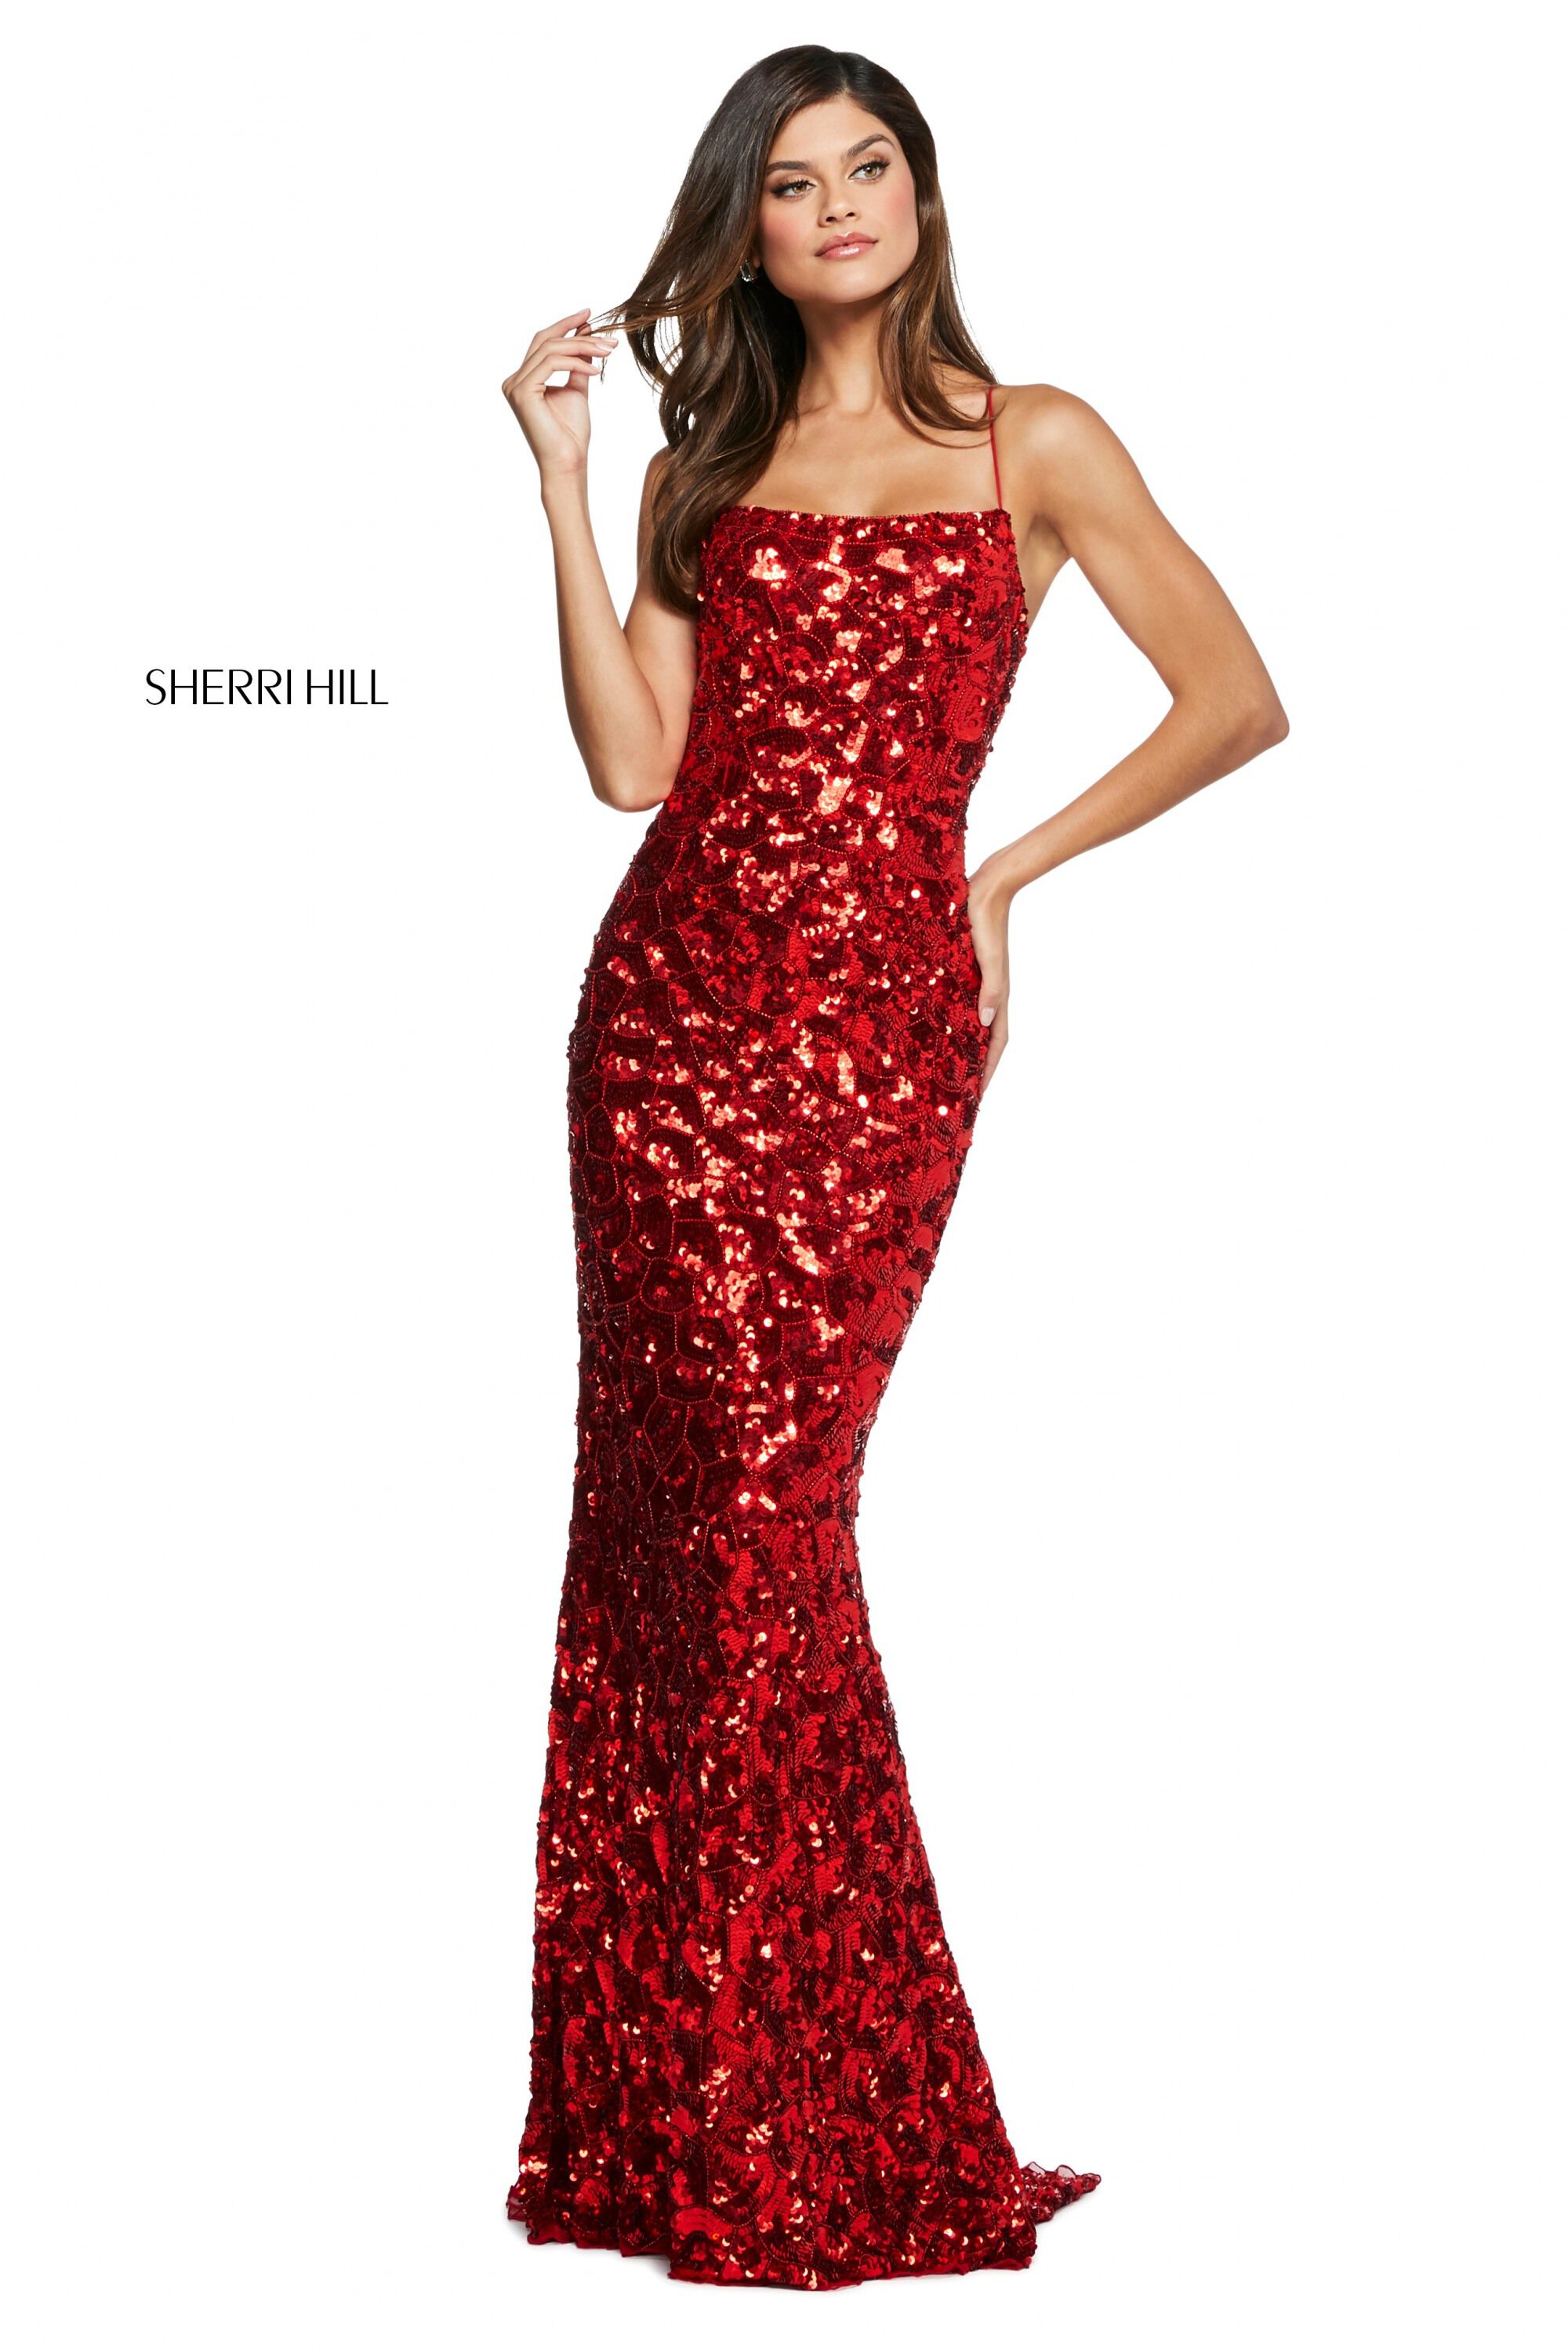 style № 53456 designed by SherriHill